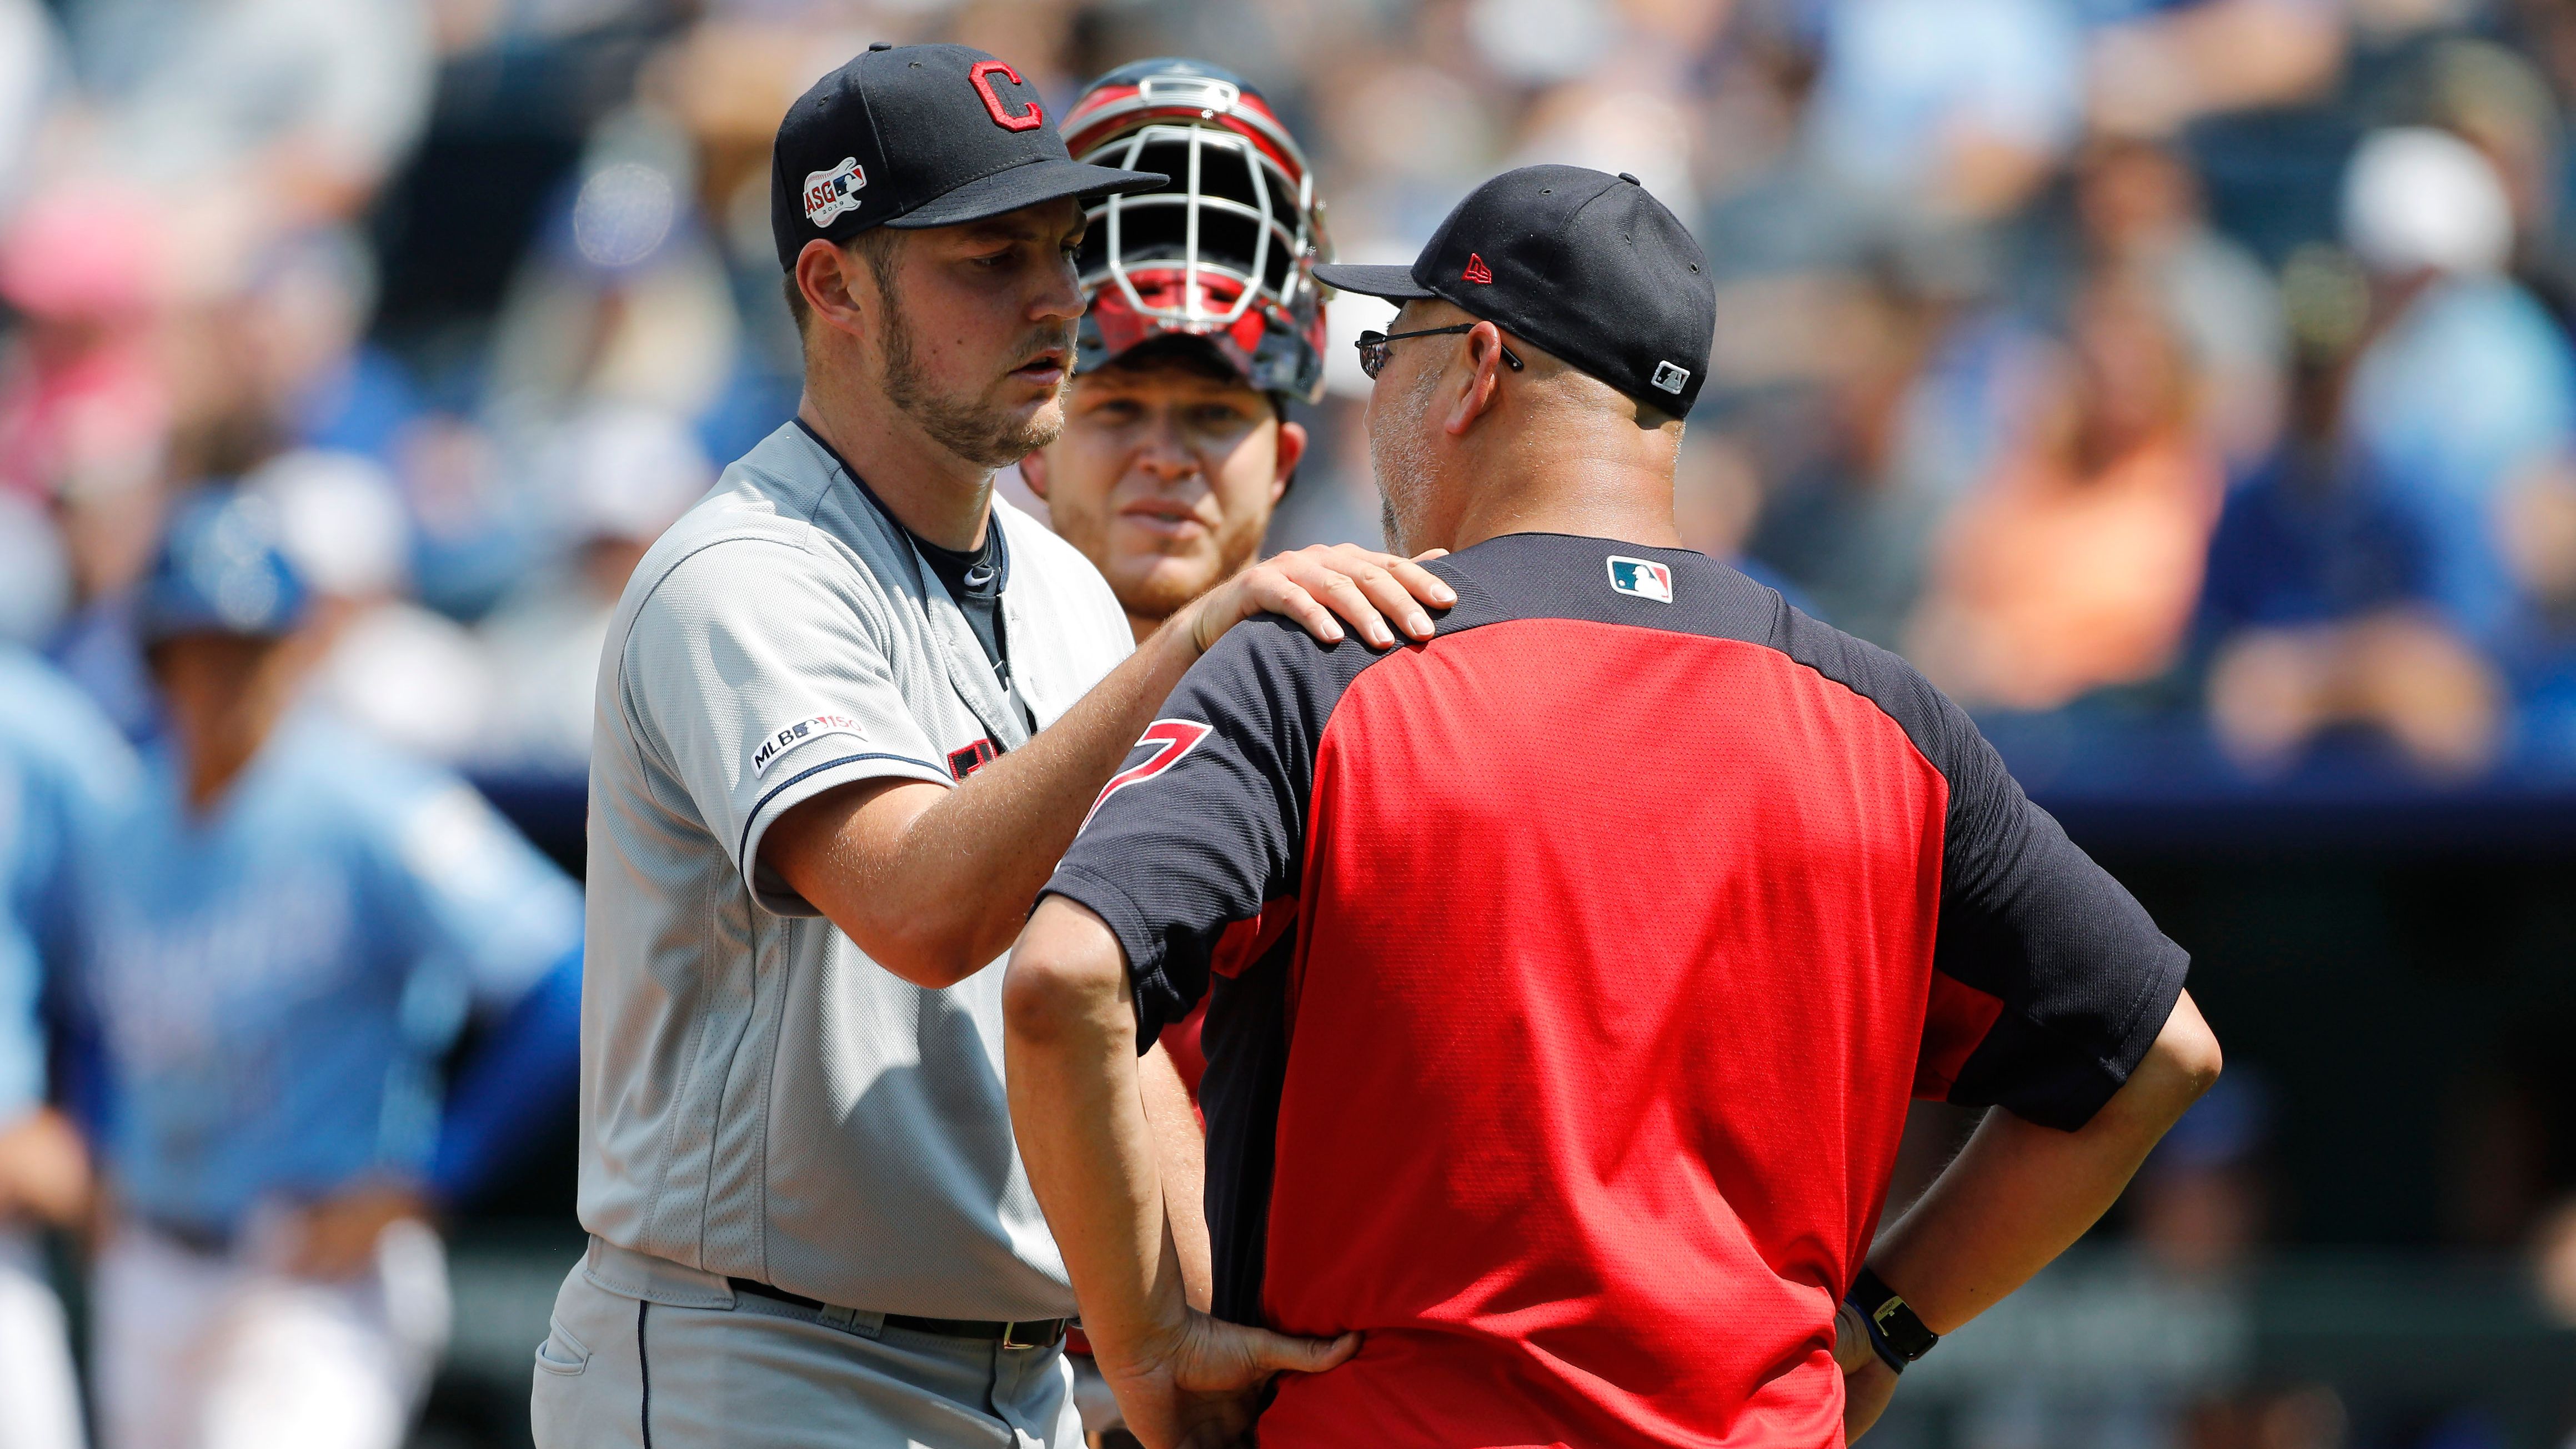 MLB: Trevor Bauer actually made a good point about baseball etiquette